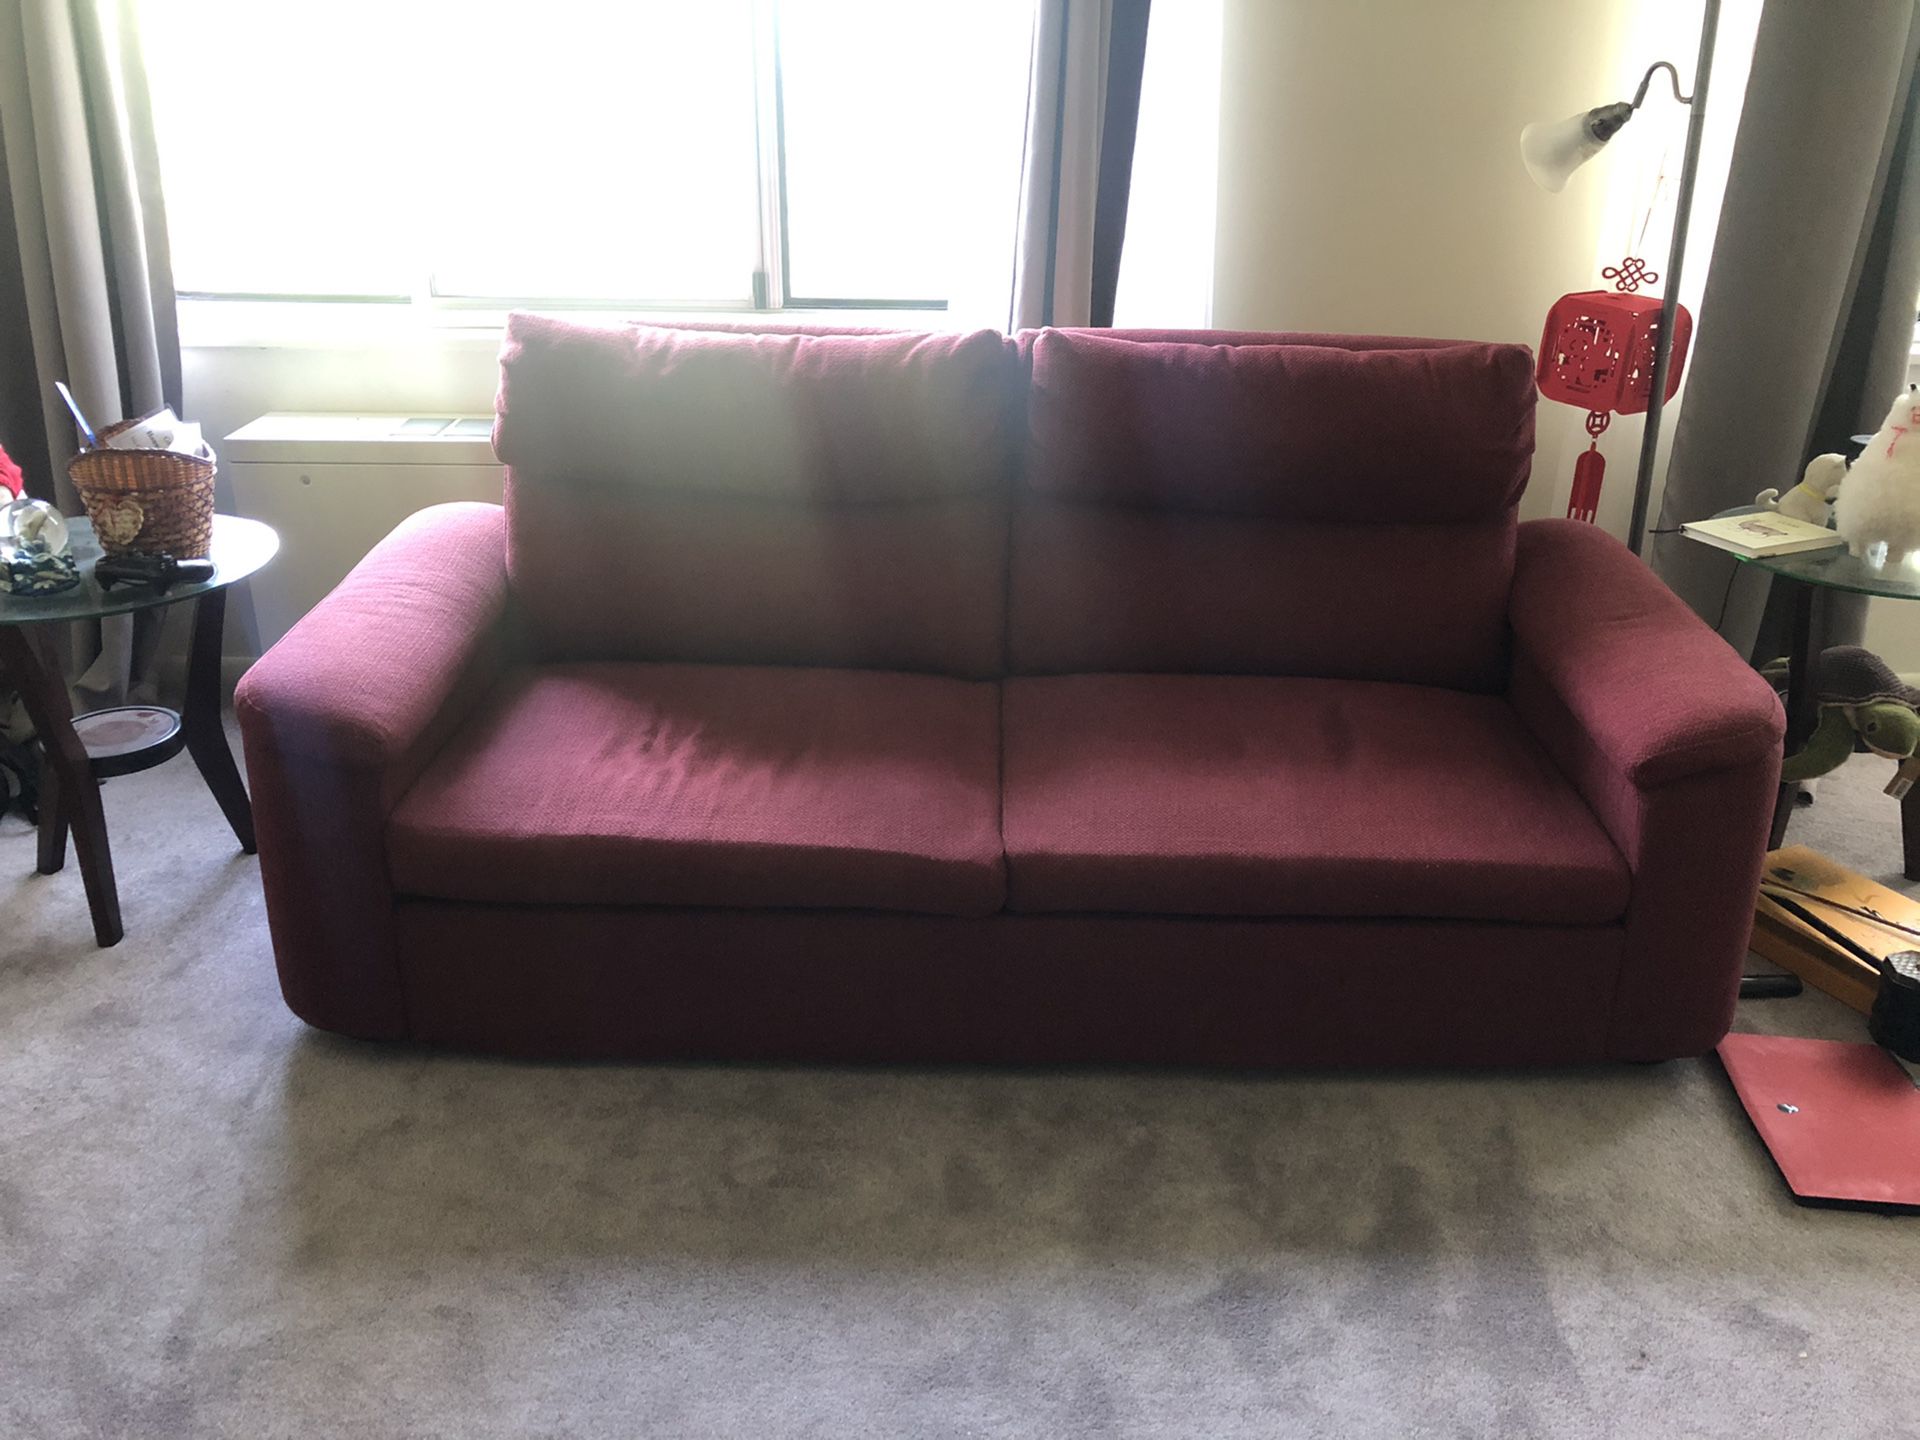 IKEA LIDHULT Sleeper Sofa Bed / Couch